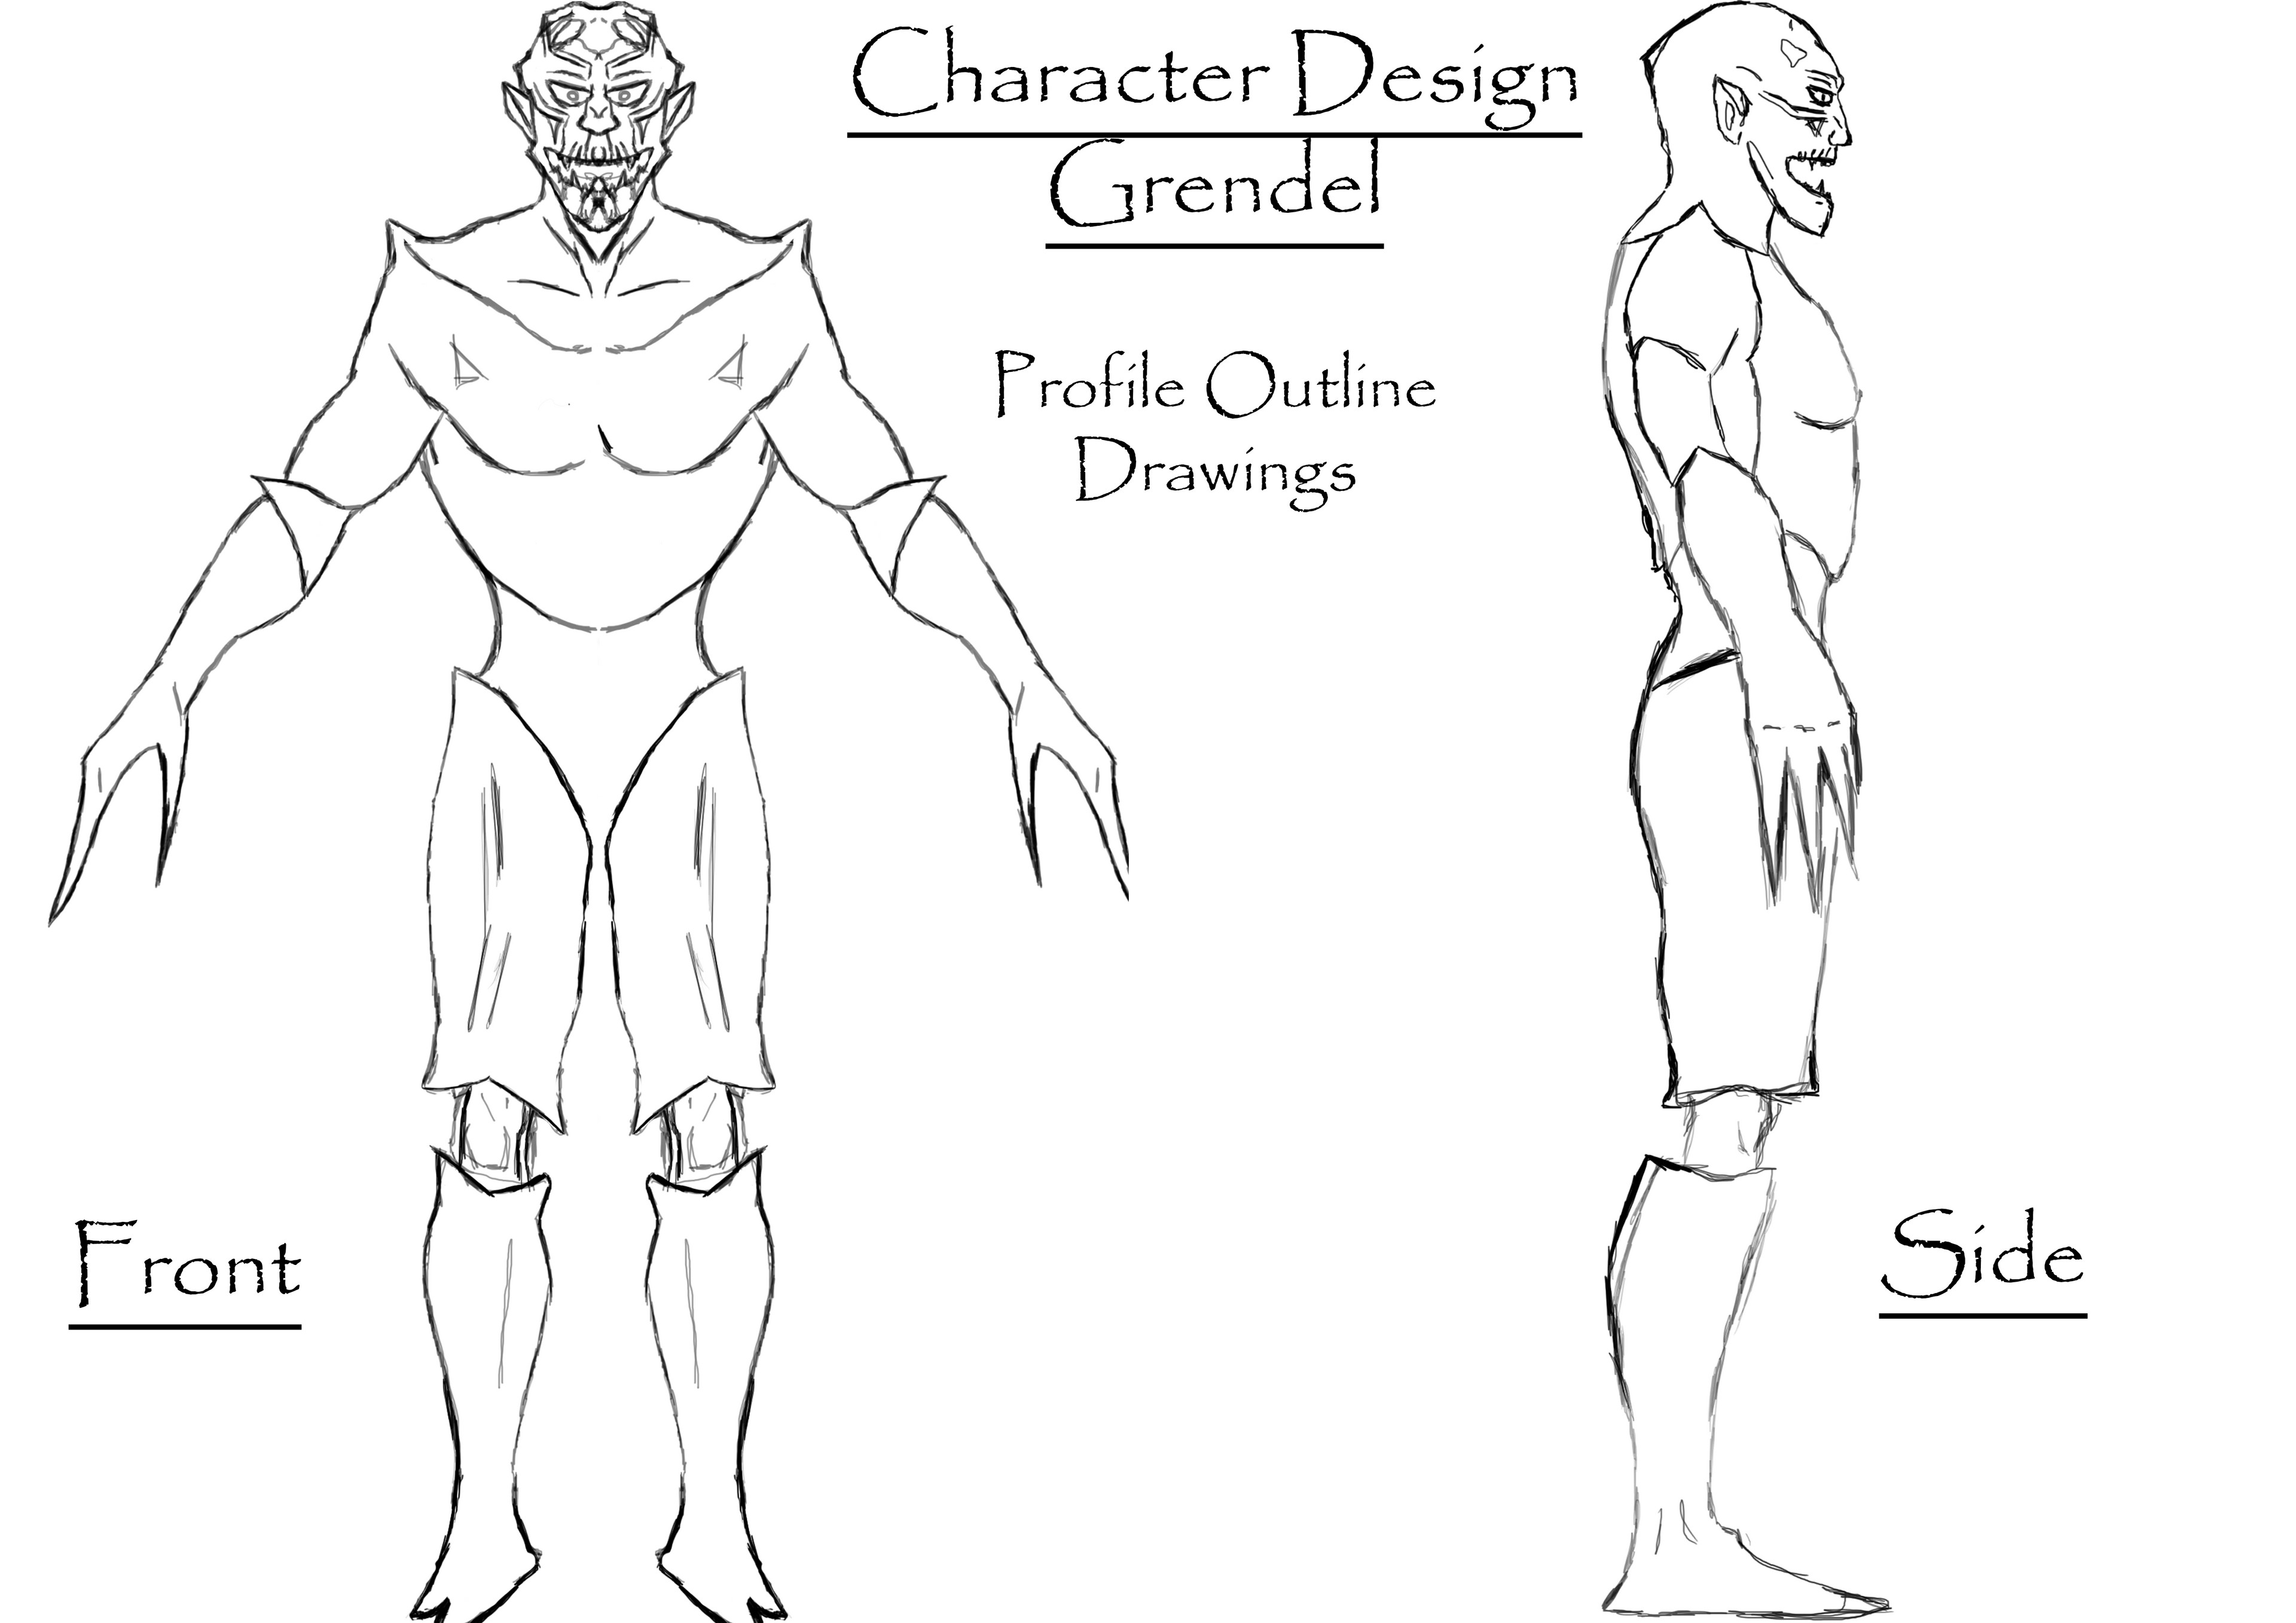 Preliminary sketches of character